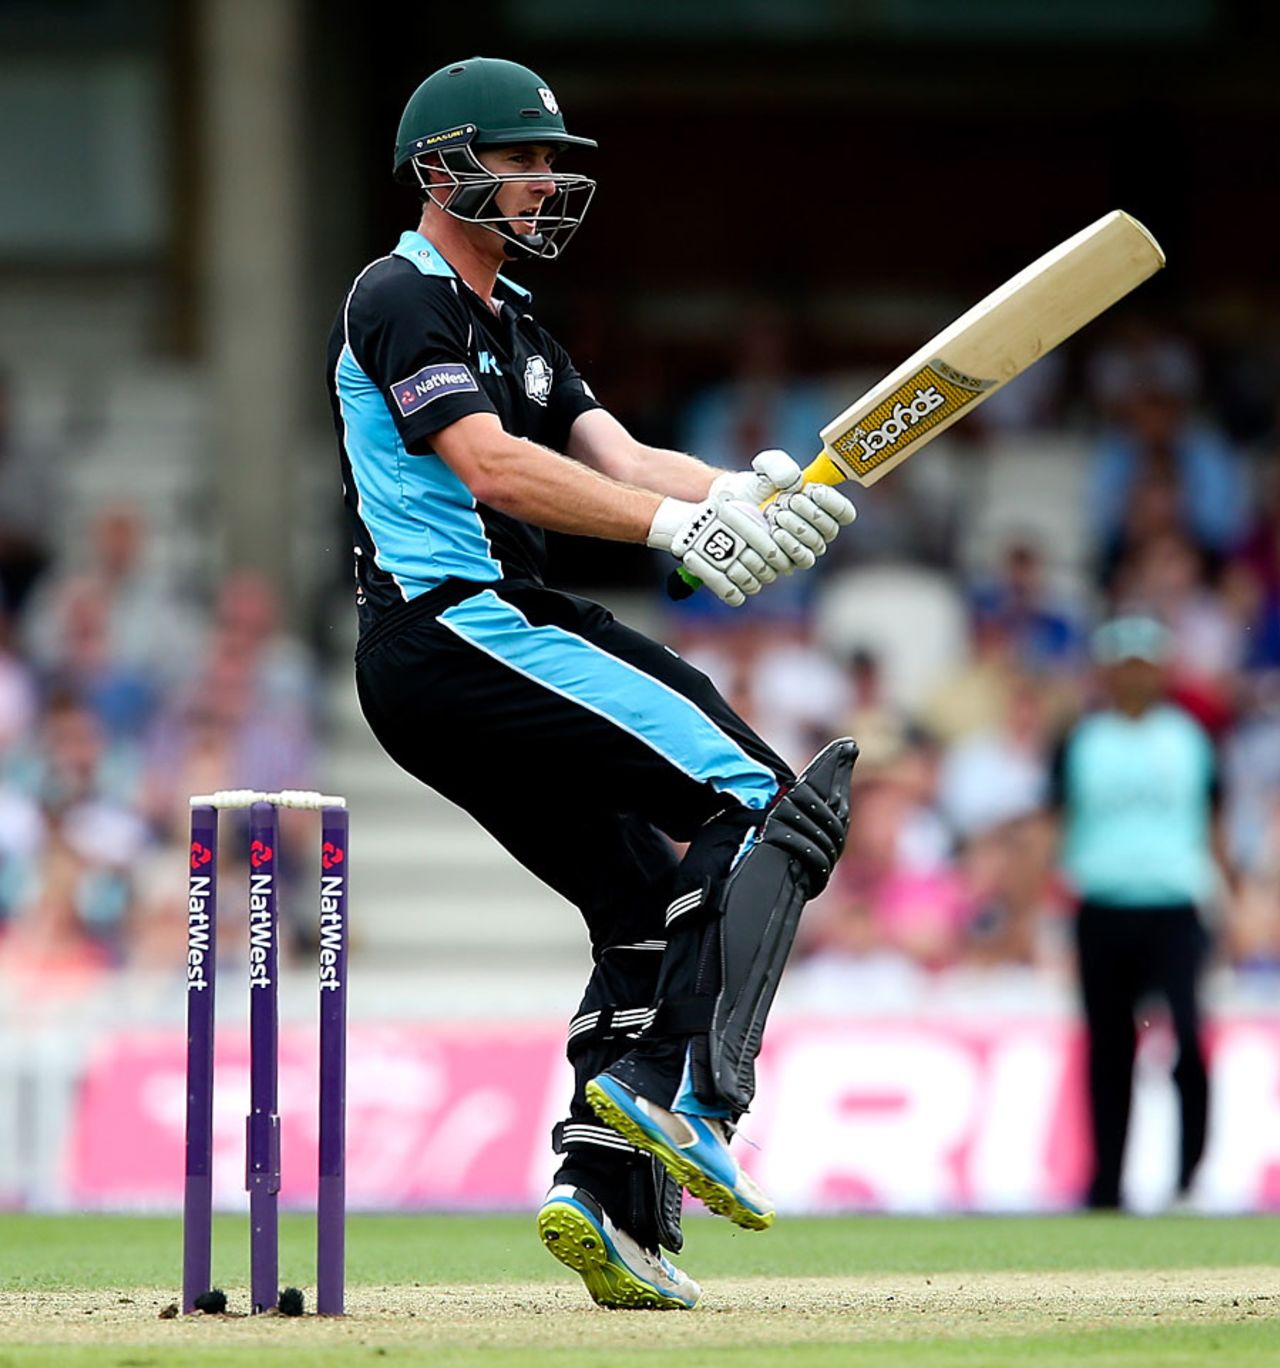 Richard Oliver top-scored for Worcestershire with 34, Surrey v Worcestershire, NatWest T20 Blast quarter-final, The Oval, August 2, 2014